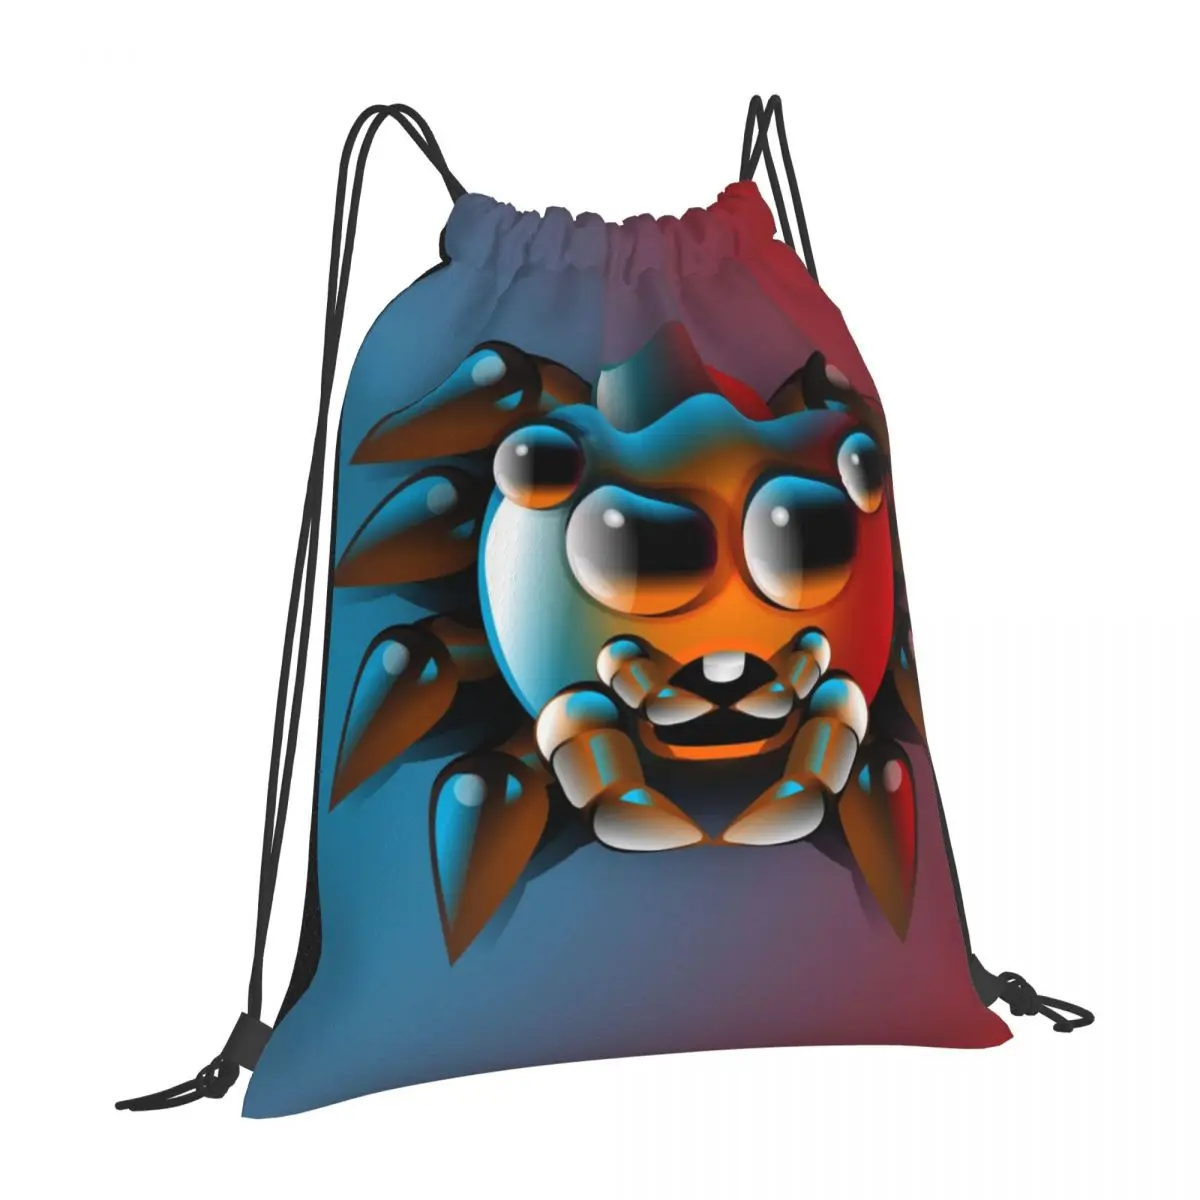 

Cute Spider Personalized Drawstring Bags With Backpack Functionality Perfect School Camping Use